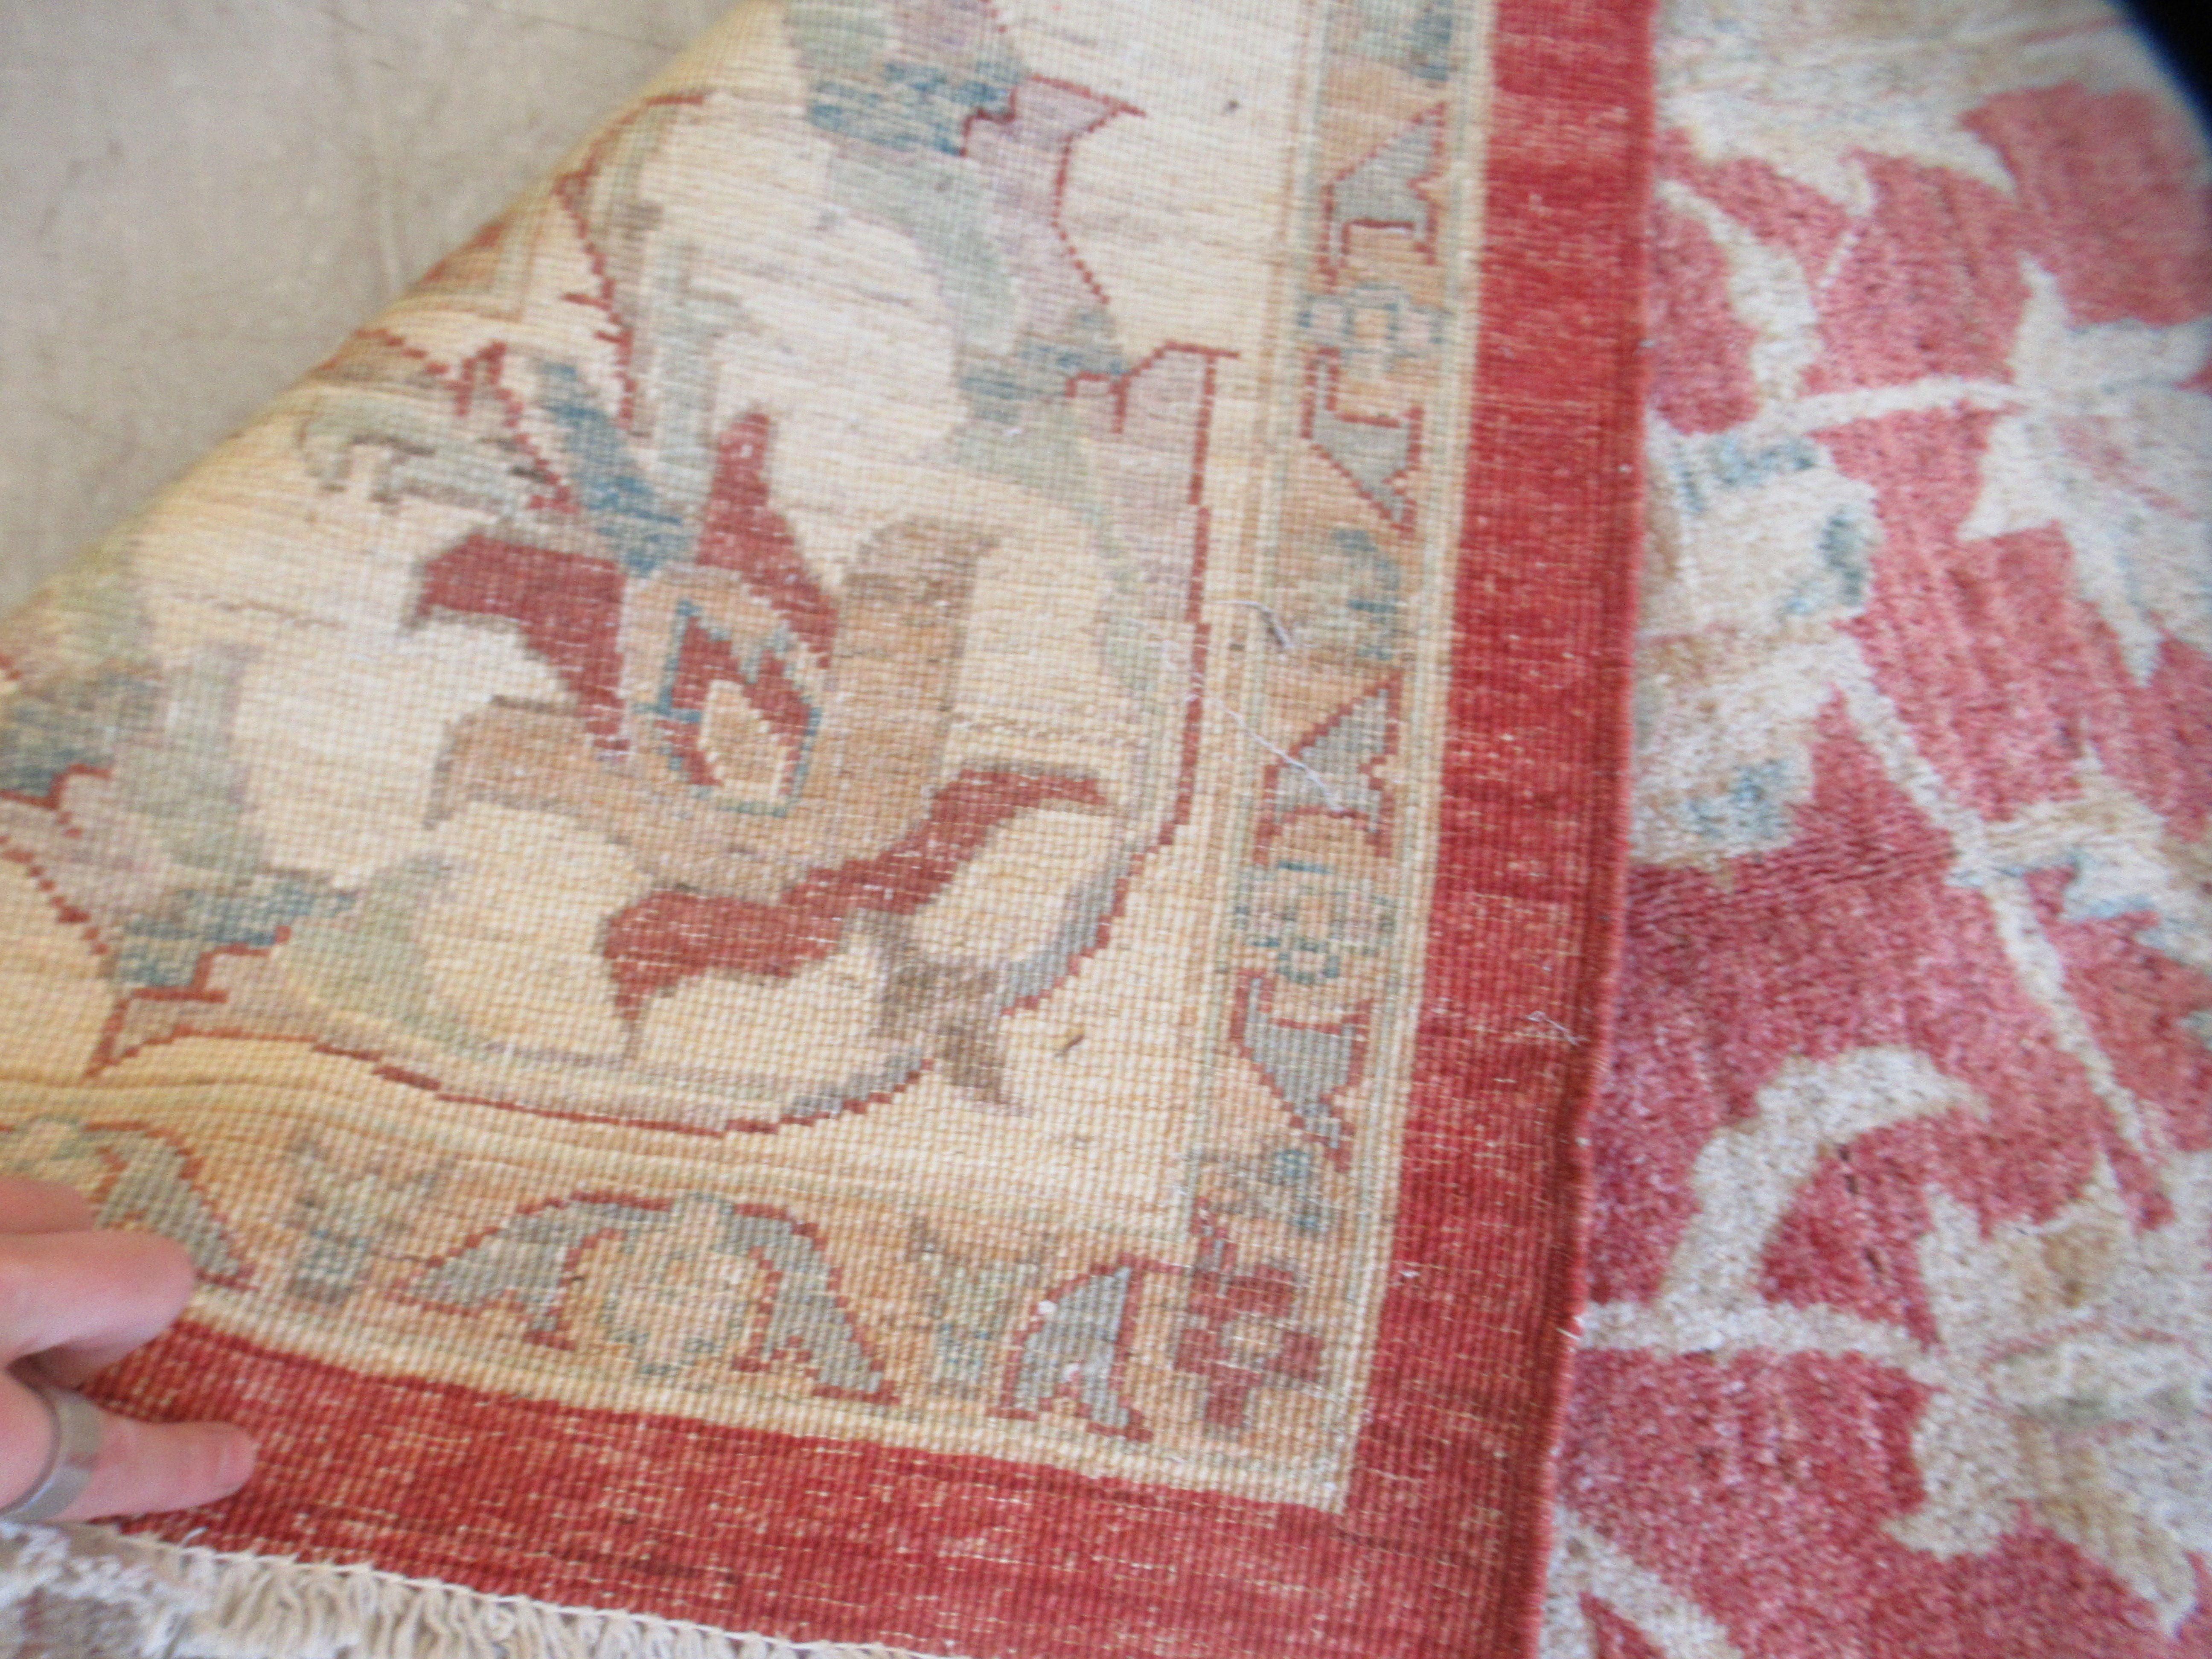 A Ziegler rug, decorated with foliate designs, on a red and cream coloured ground  79" x 78" - Image 6 of 6